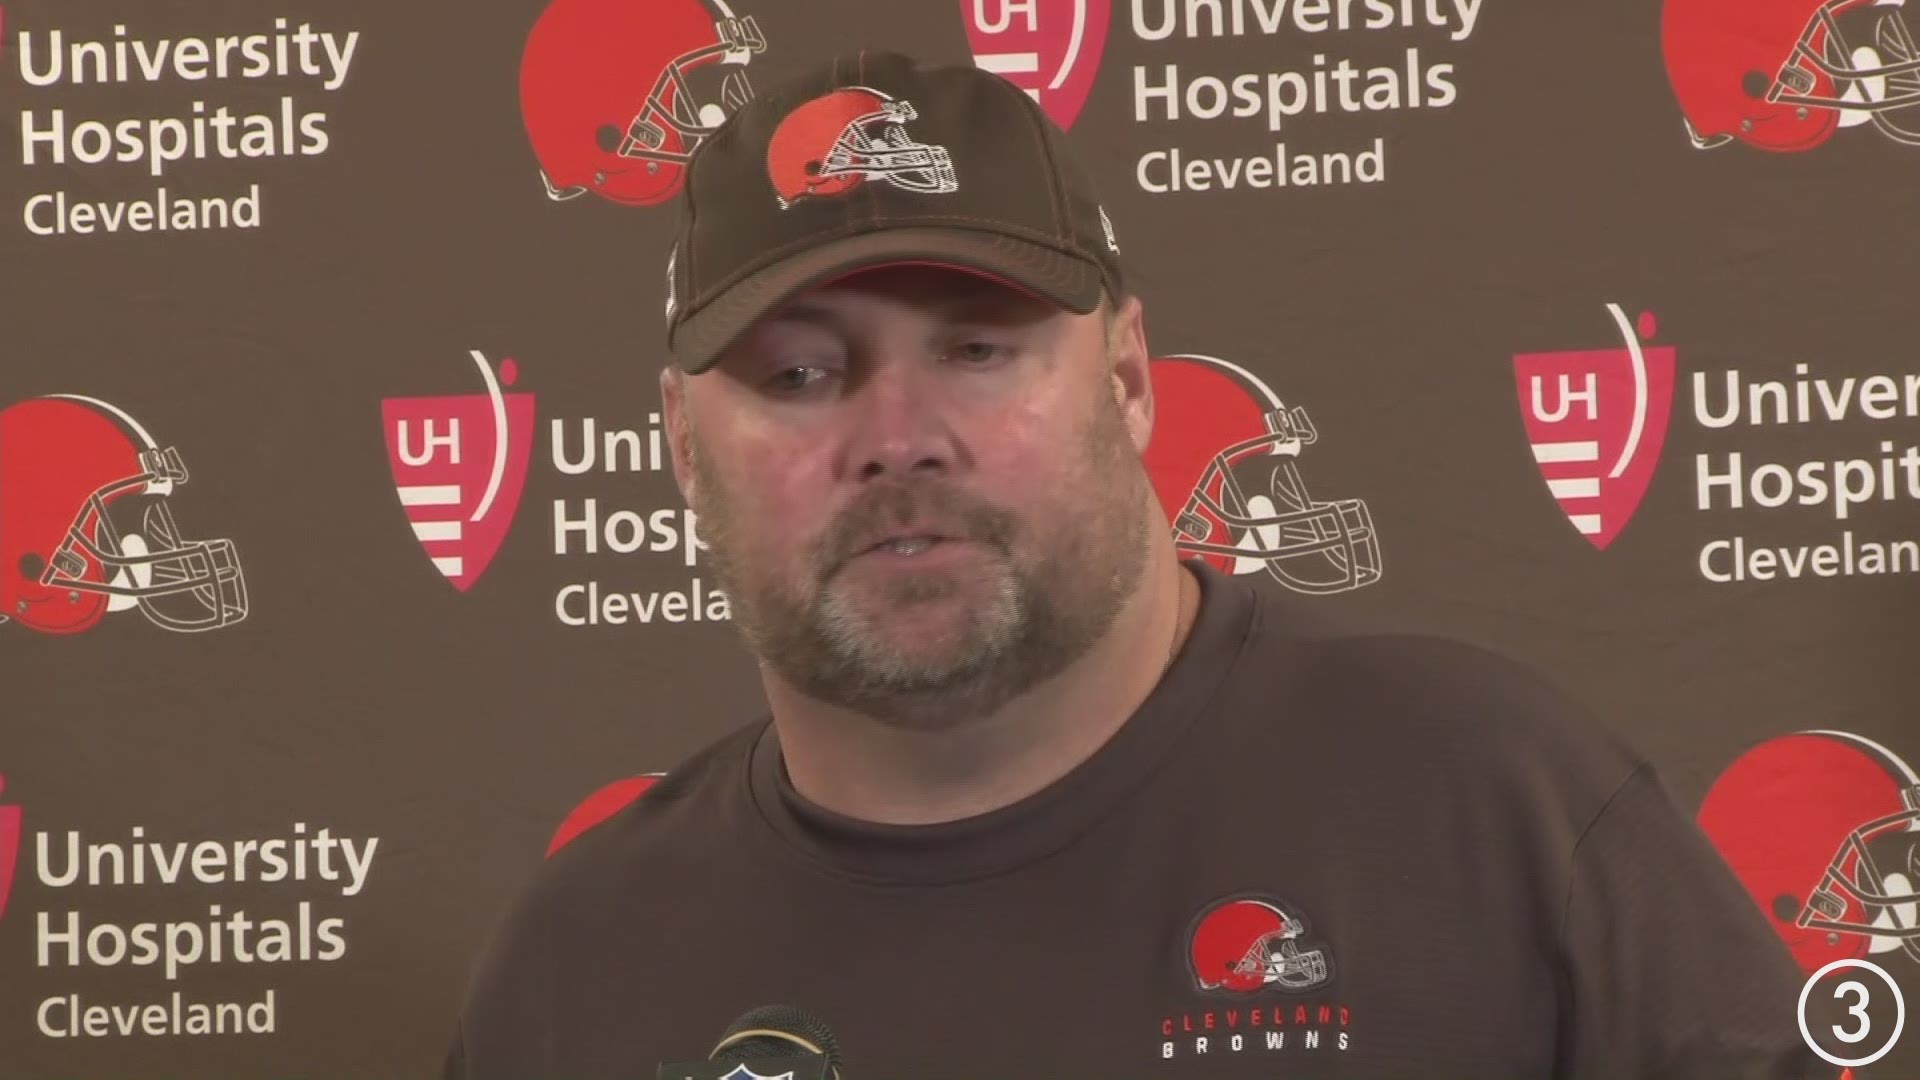 Cleveland Browns head coach Freddie Kitchens said he doesn't regret wearing a t-shirt that blamed the Pittsburgh Steelers for a Nov. 14 brawl.